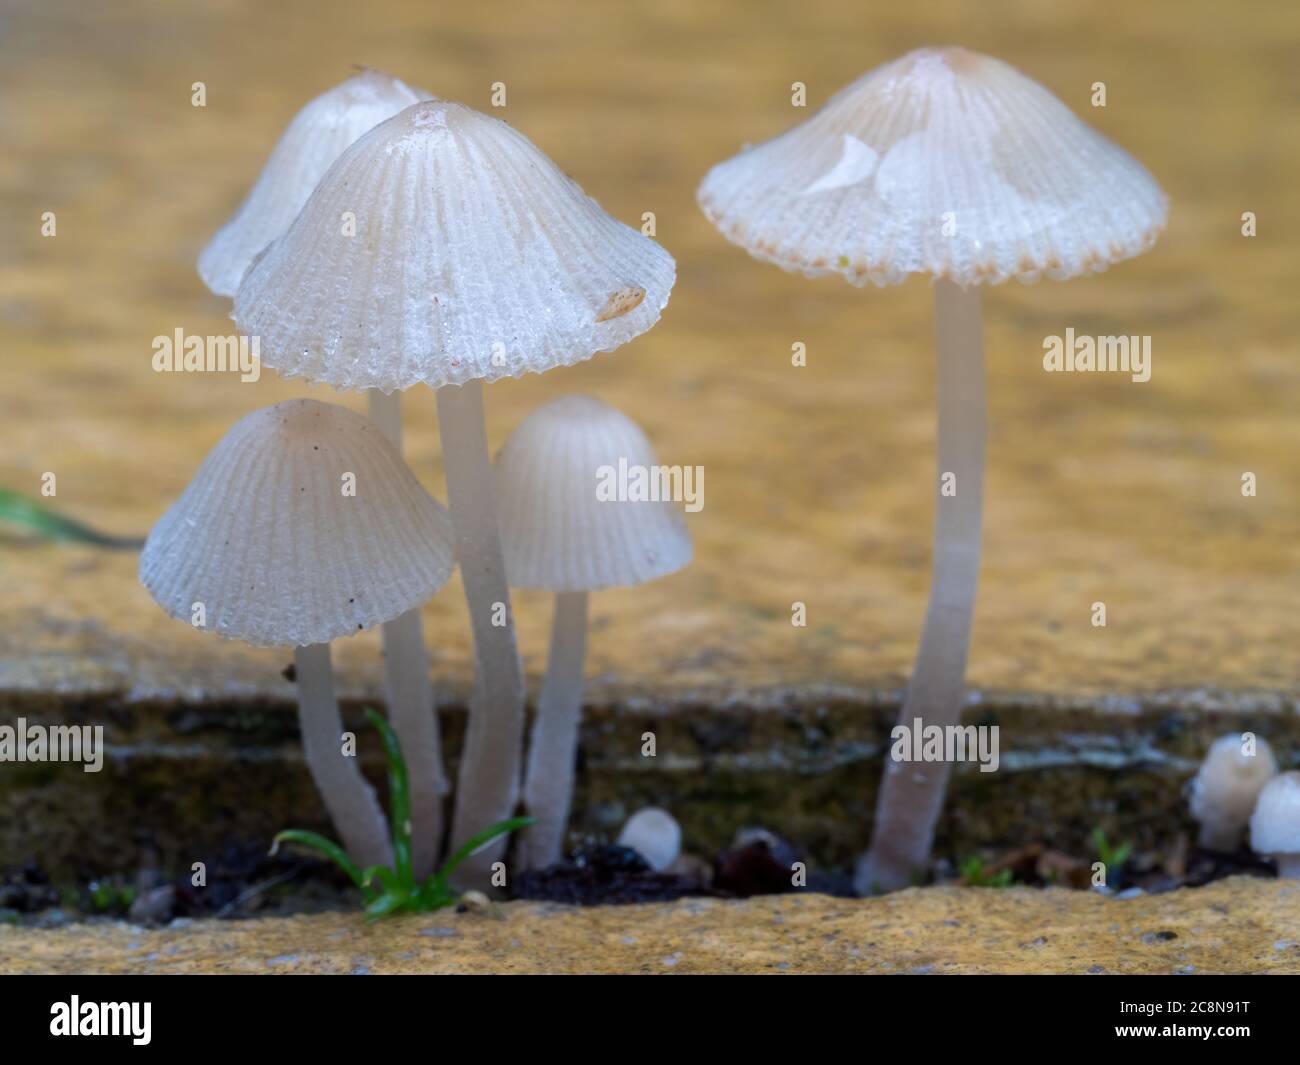 Delicate and fragile Parasola auricoma fungi growing between paving stones. Stock Photo